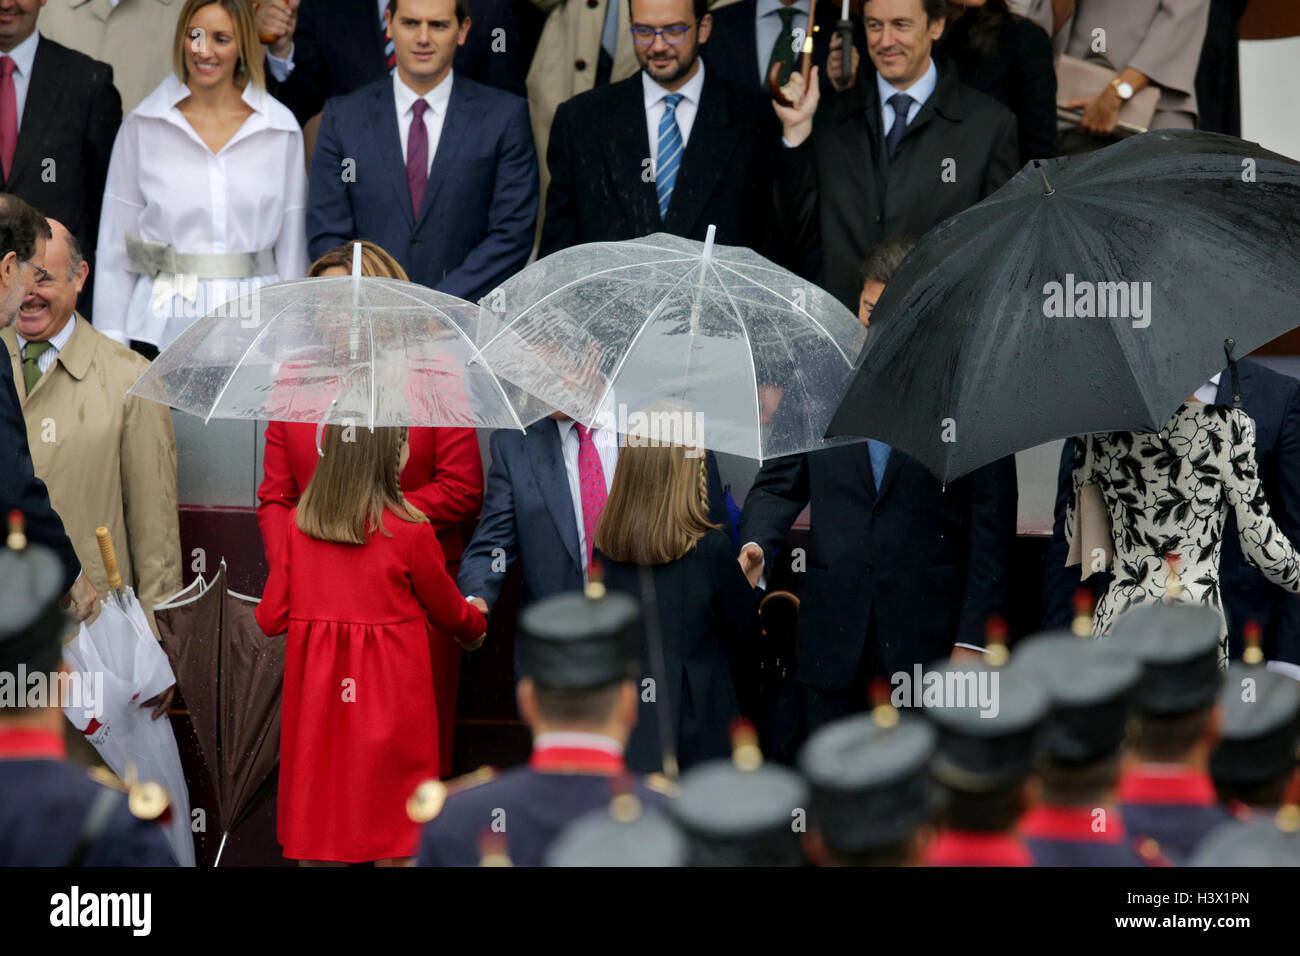 Madrid, Spain. 12th October, 2016. Queen Letizia Ortiz and their daughters princesses Leonor and Sofia of Borbon attending a military parade, during the known as Dia de la Hispanidad, Spain's National Day, in Madrid, on Wednesday 12nd October, 2016. Credit:  Gtres Información más Comuniación on line,S.L./Alamy Live News Stock Photo